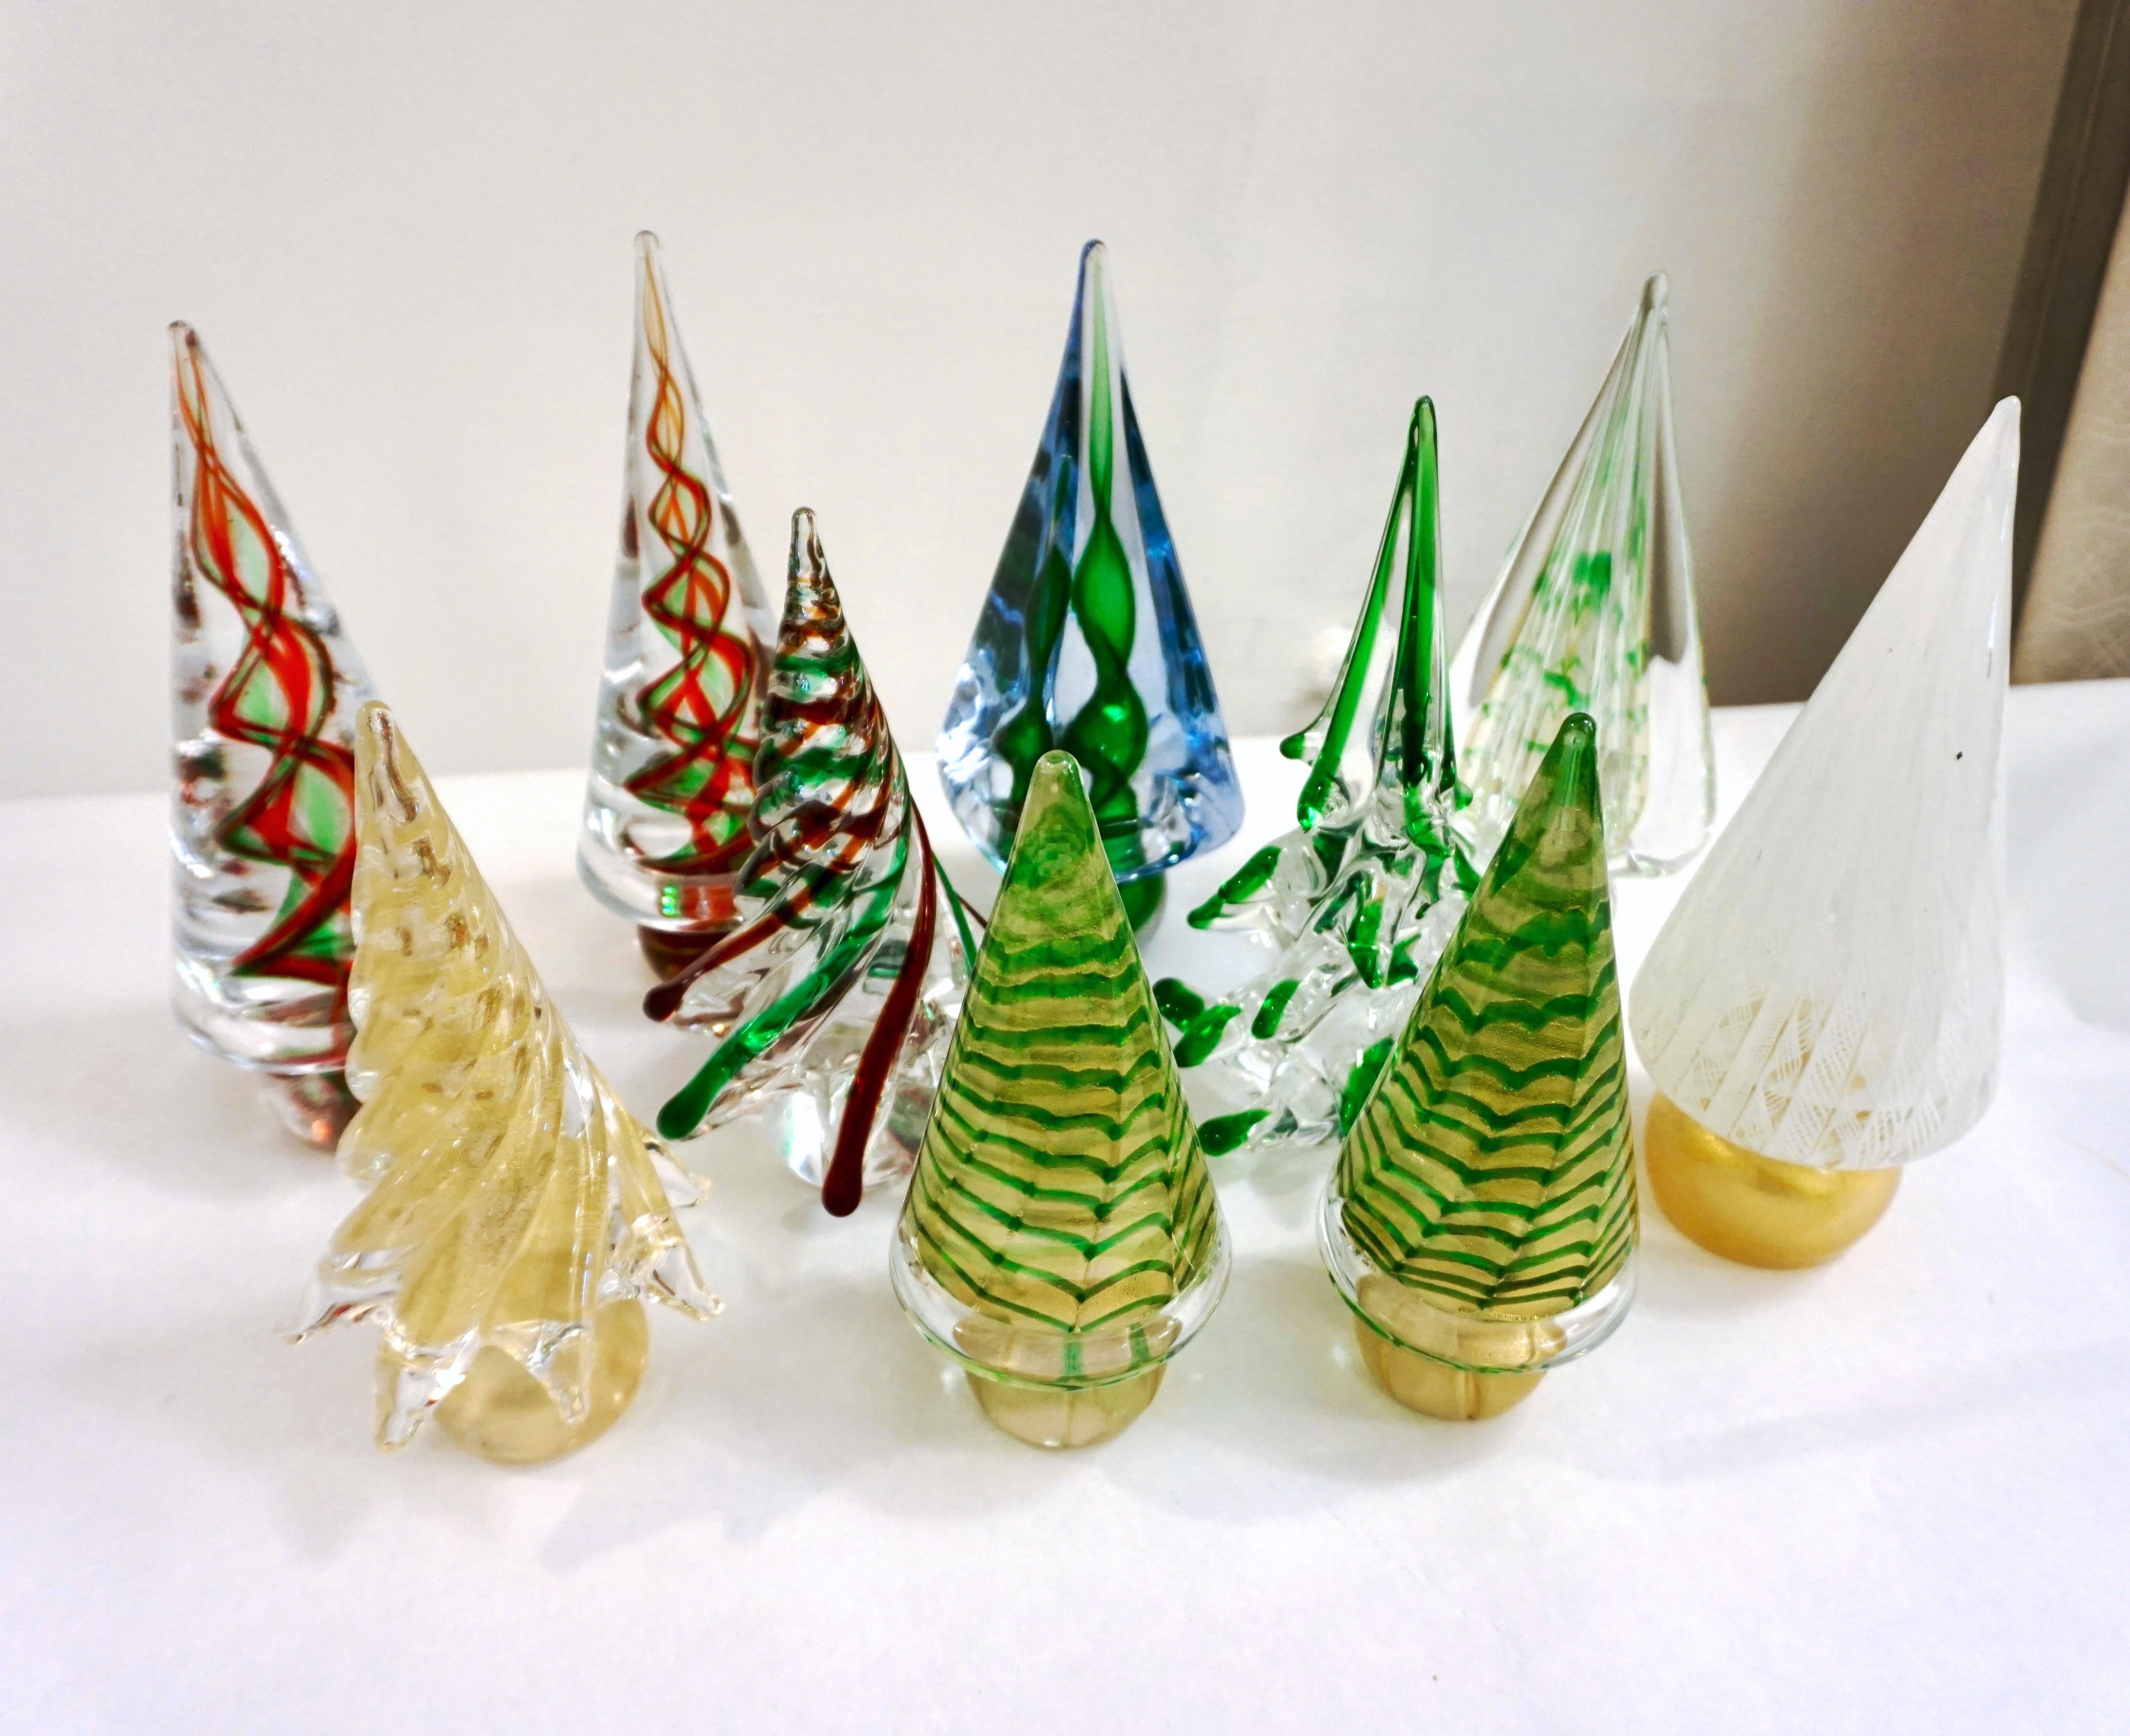 Christmas tree sculpture of sleek Minimalist cone design, in mouth blown Murano glass and handcrafted, a vintage creation signed by Cenedese. Worked in sommerso crystal clear layered glass, it is realized in an attractive vibrant green color with